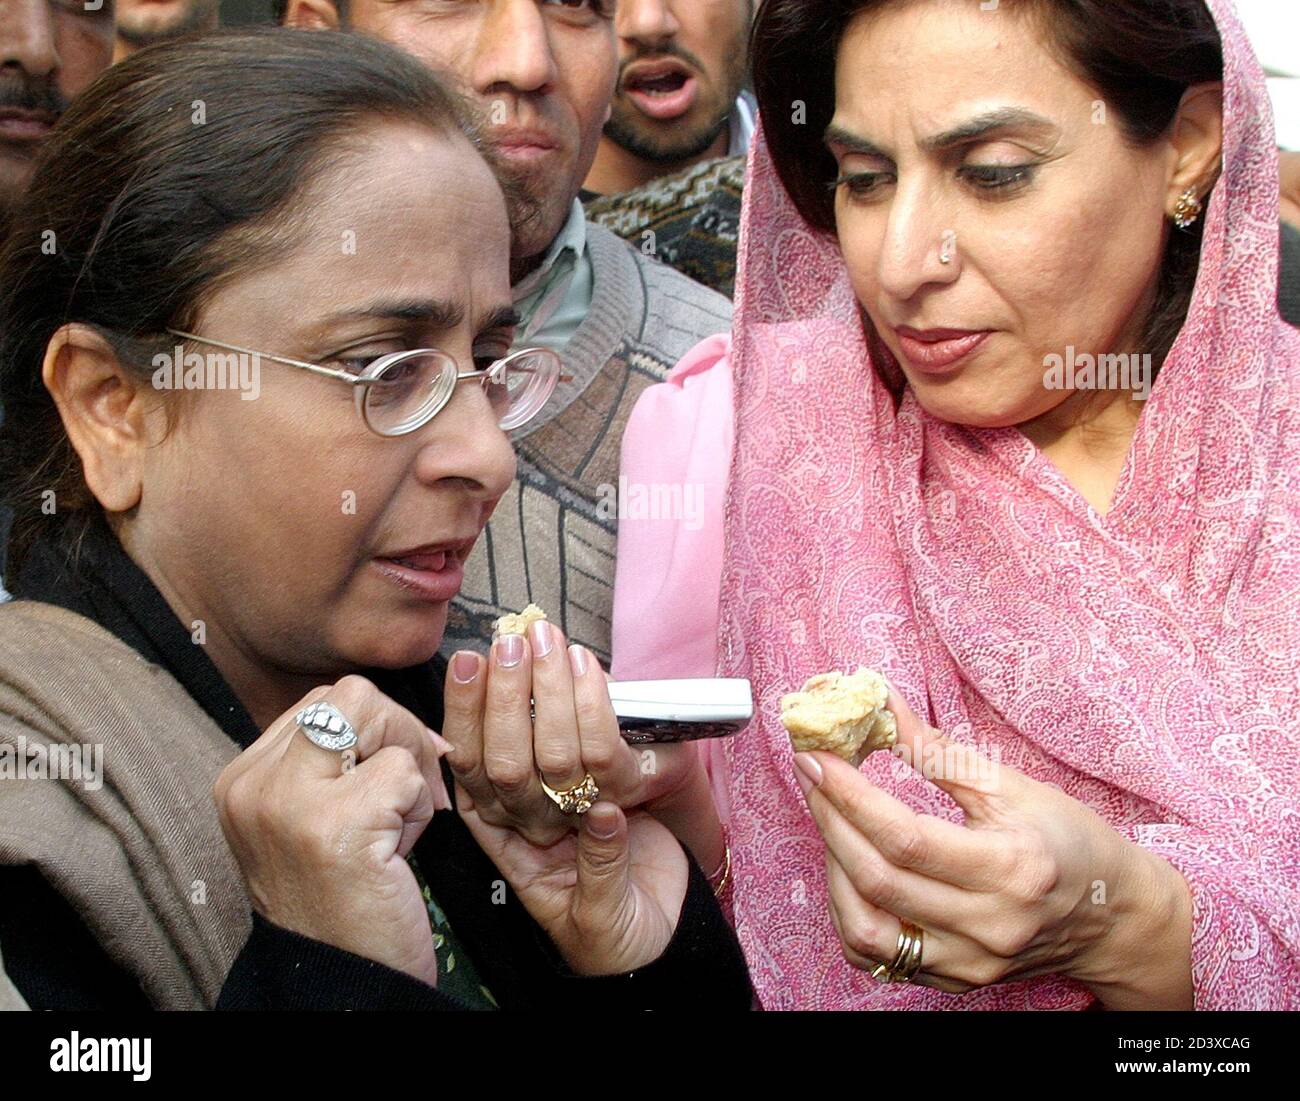 A supporter of the Pakistan People's Party gives sweets to Azra (L) sister of Asif Ali Zardari, husband of Pakistan's former Prime Minister Benazir Bhutto, after a Pakistani court decision to grant bail to Zardari in Islamabad November 22, 2004. A Pakistani court on Monday granted bail to Asif Ali Zardari, and officials from her party said the decision should result in his release after eight years in prison. REUTERS/Faisal Mahmood  MK/TW Stock Photo